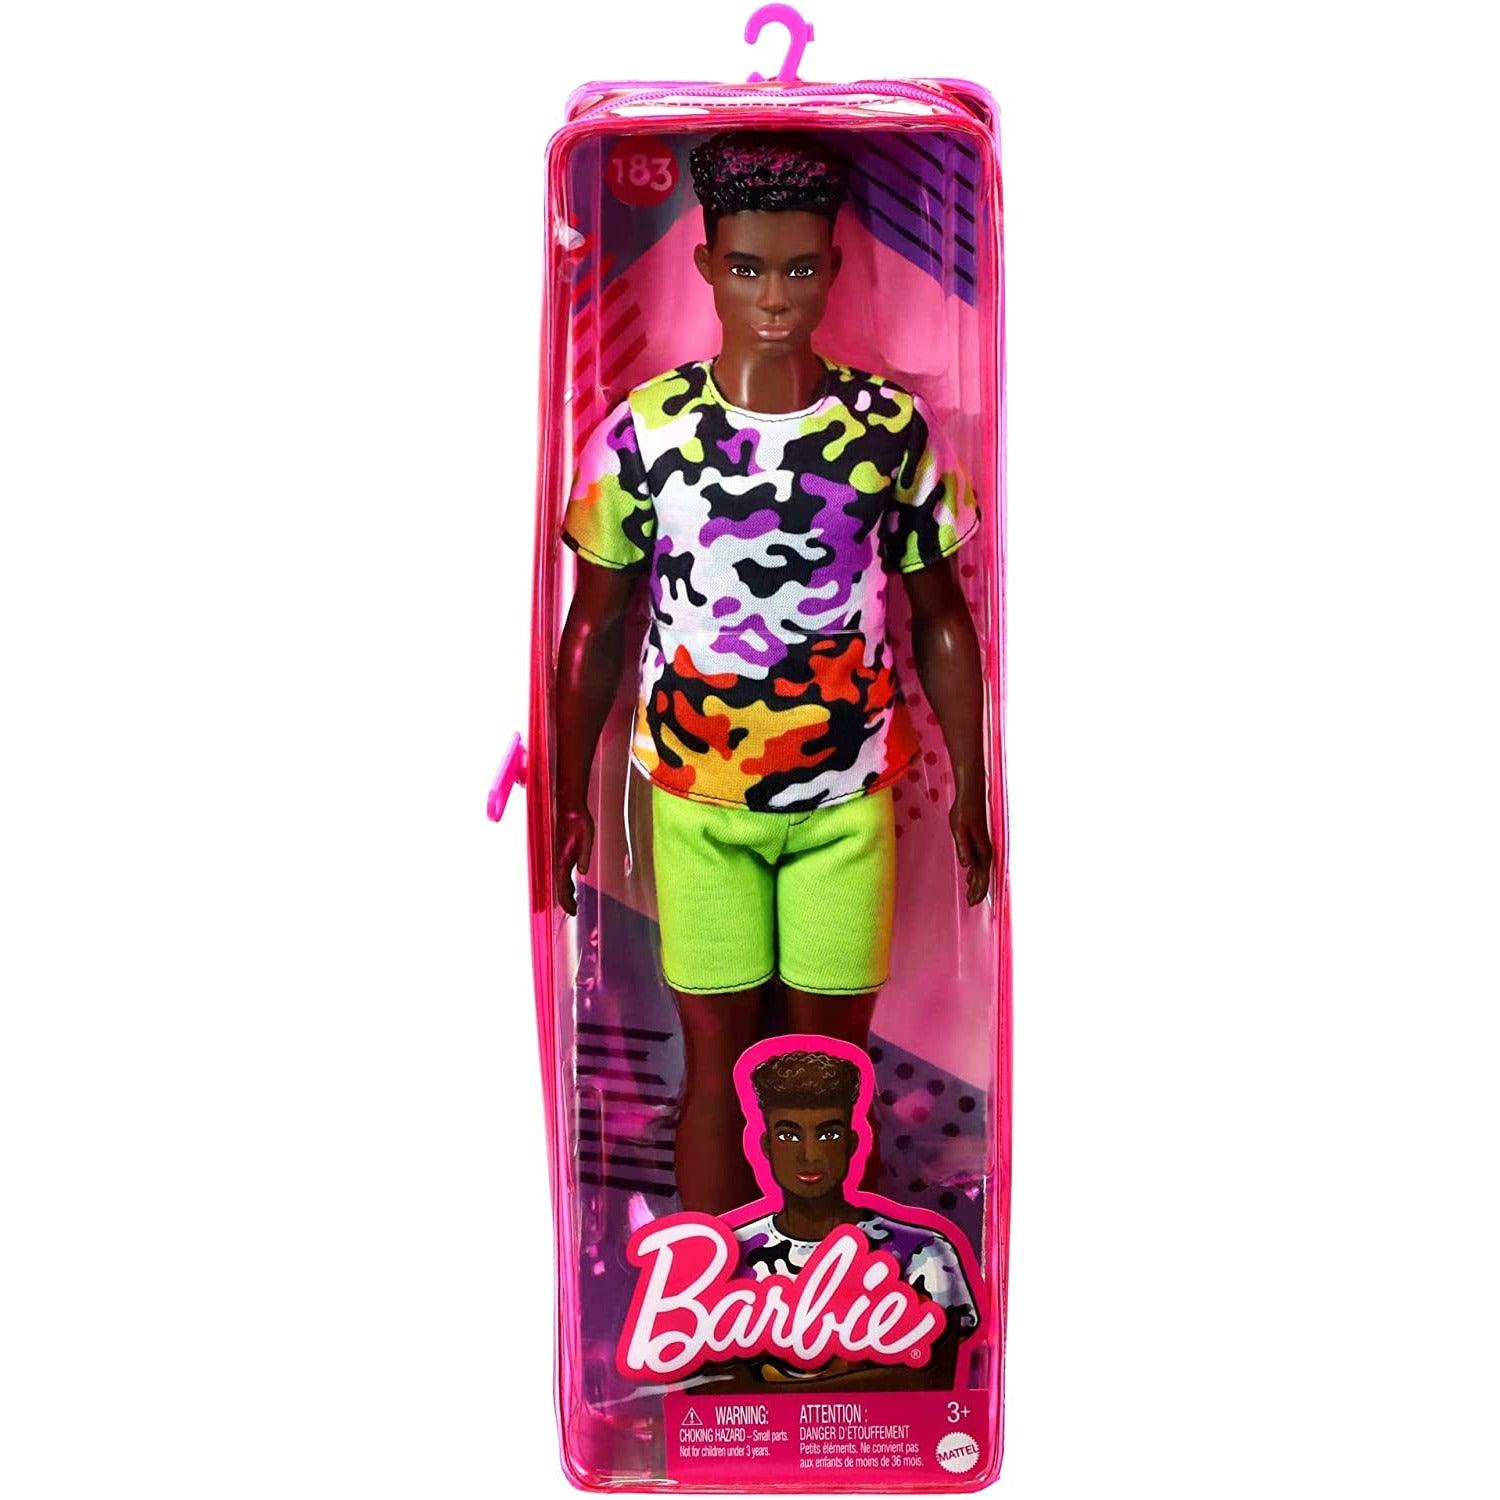 Barbie Ken Fashionistas Doll, Broad, Black Curly Hair, Multi-Colored Camo Print Shirt, Neon Green Shorts, Silvery Sneakers - BumbleToys - 3-8 Years, 5-7 Years, Barbie, Boys, collectible, collectors, Fashion Dolls & Accessories, Girls, Pre-Order